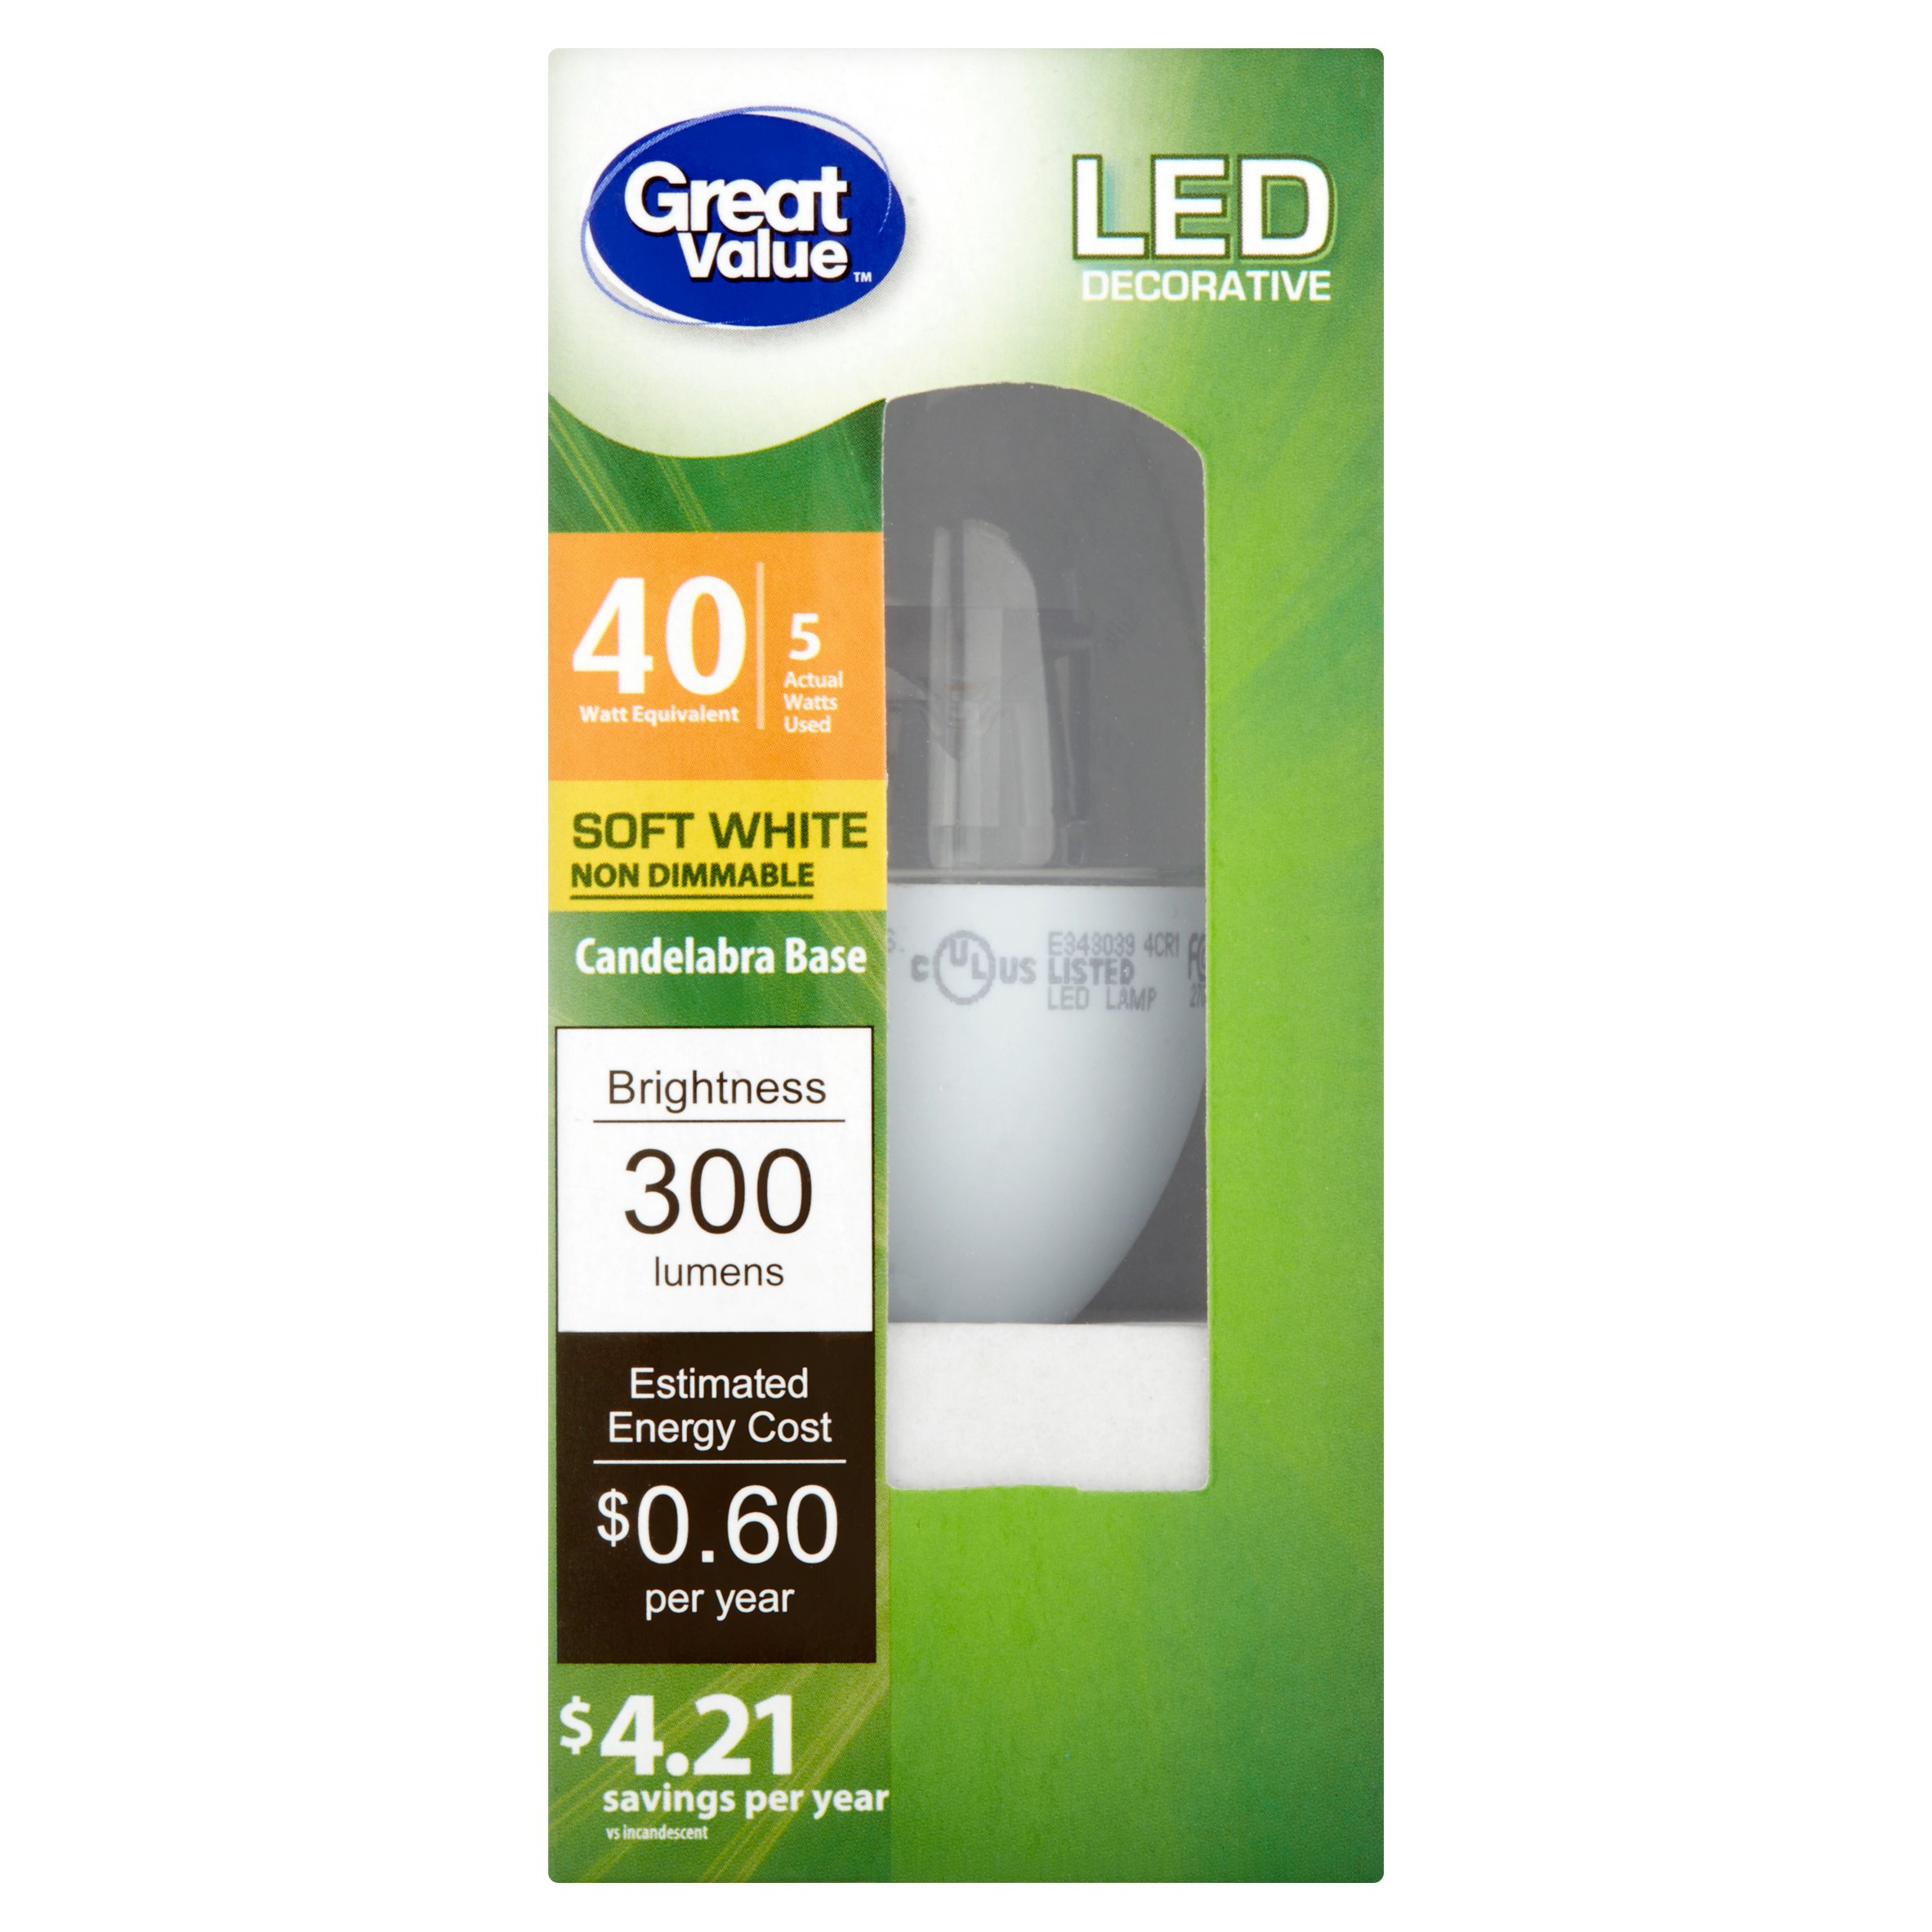 Great Value LED Light Bulb, 5W (40W Equivalent) B11 Decorative Lamp E12 Candelabra Base, Non-Dimmable, Soft White - image 1 of 5